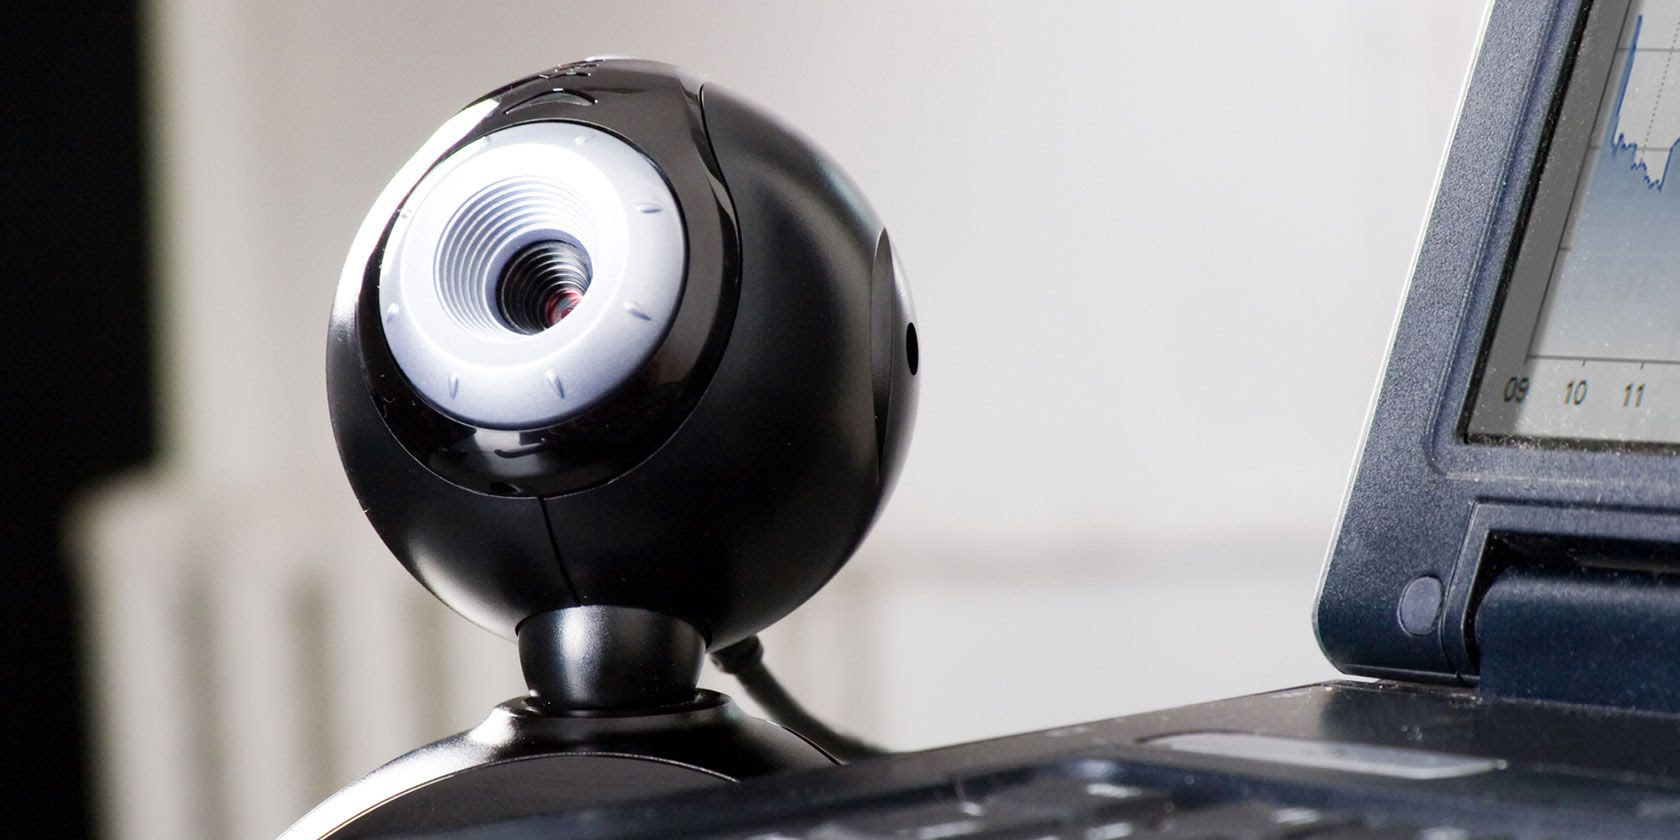 How to Check If Your Webcam Was Hacked: 7 Things You Need to Do